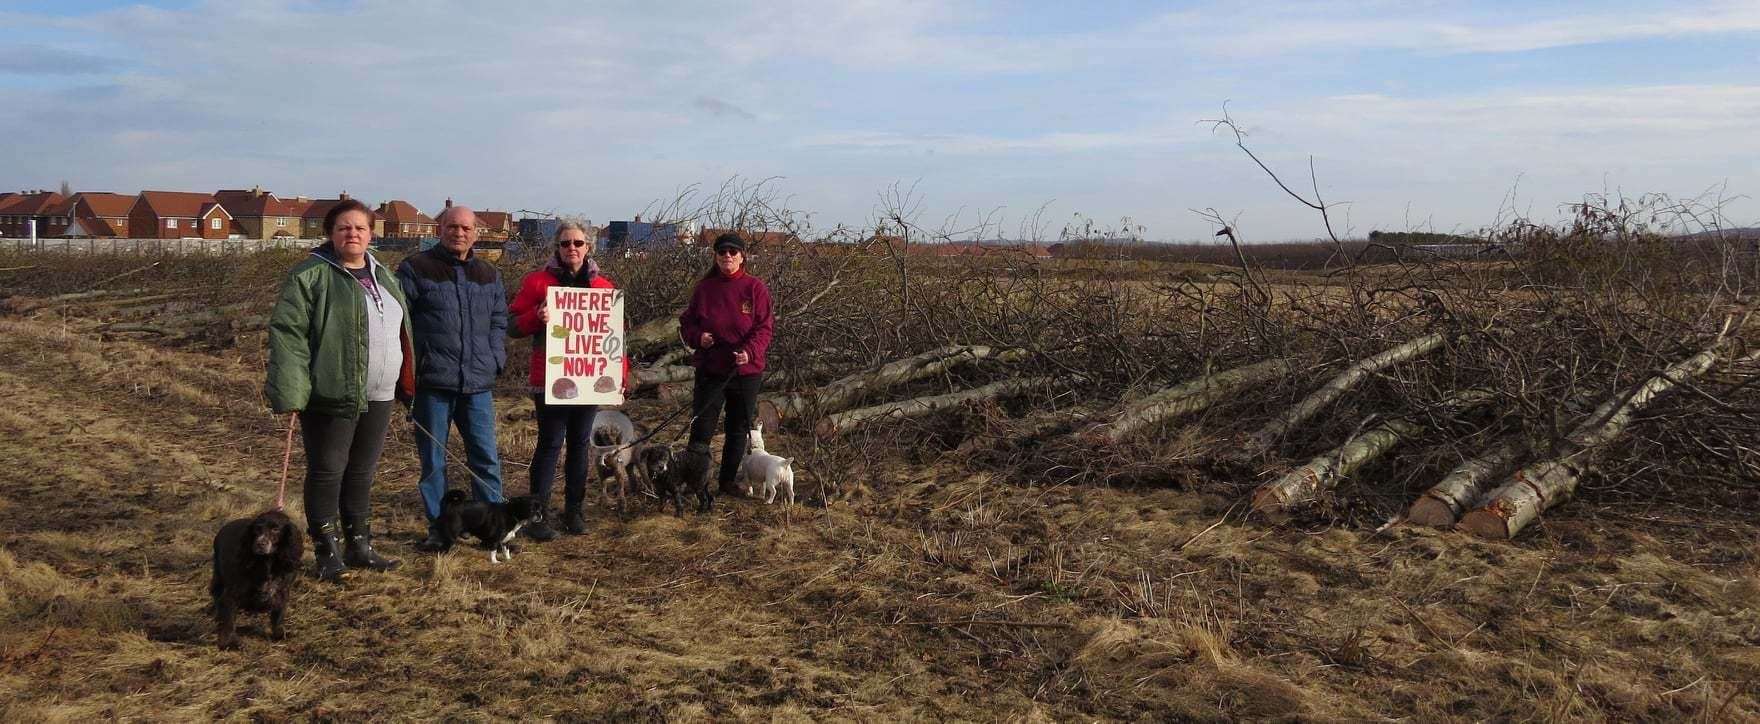 Protestors are mourning the felling of trees in Love Lane, Faversham (54873722)